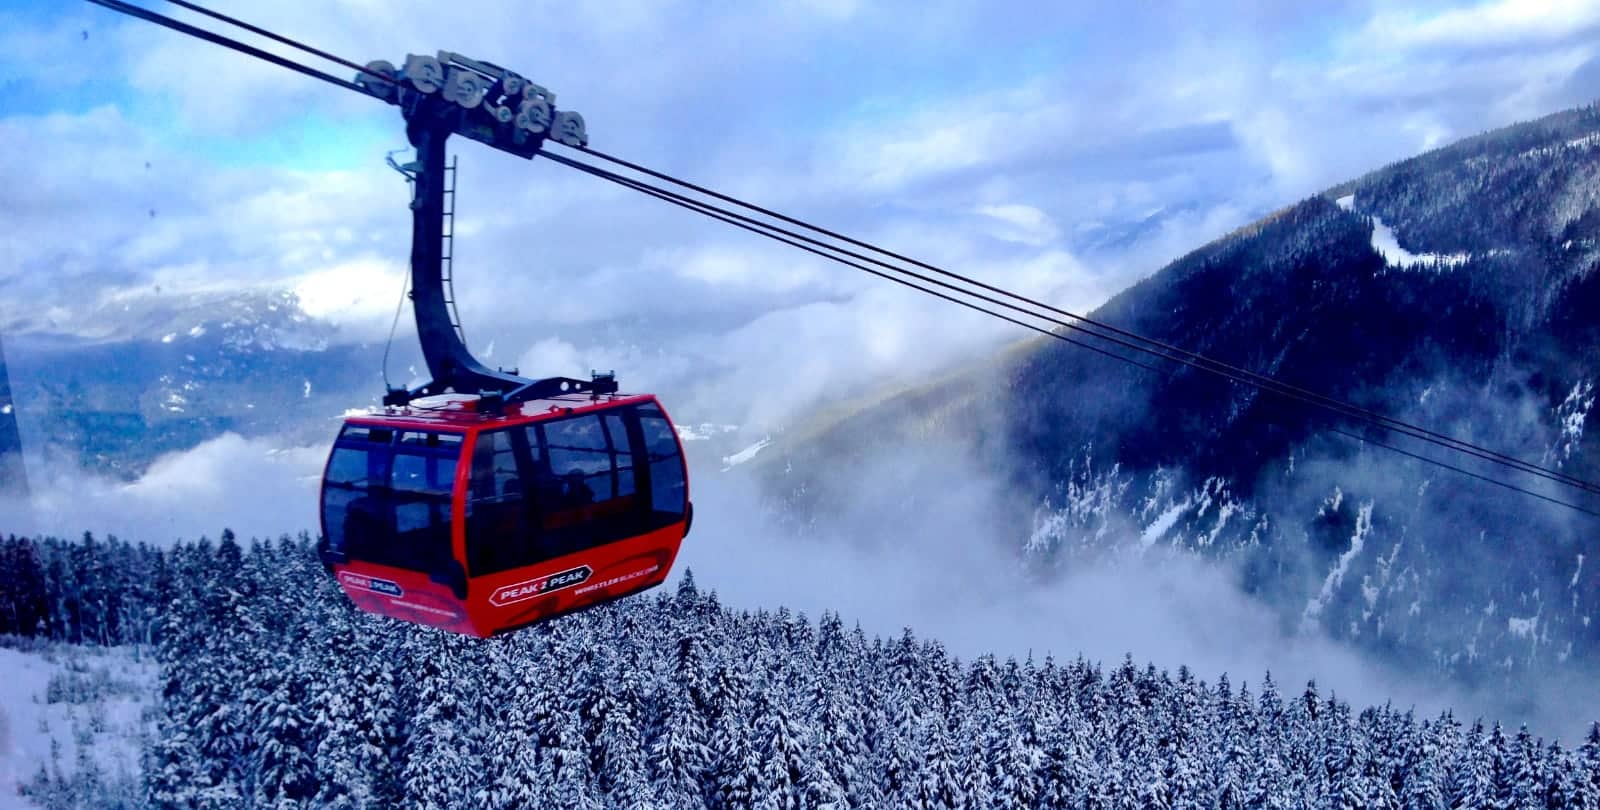 Red gondola passing over trees in mountains